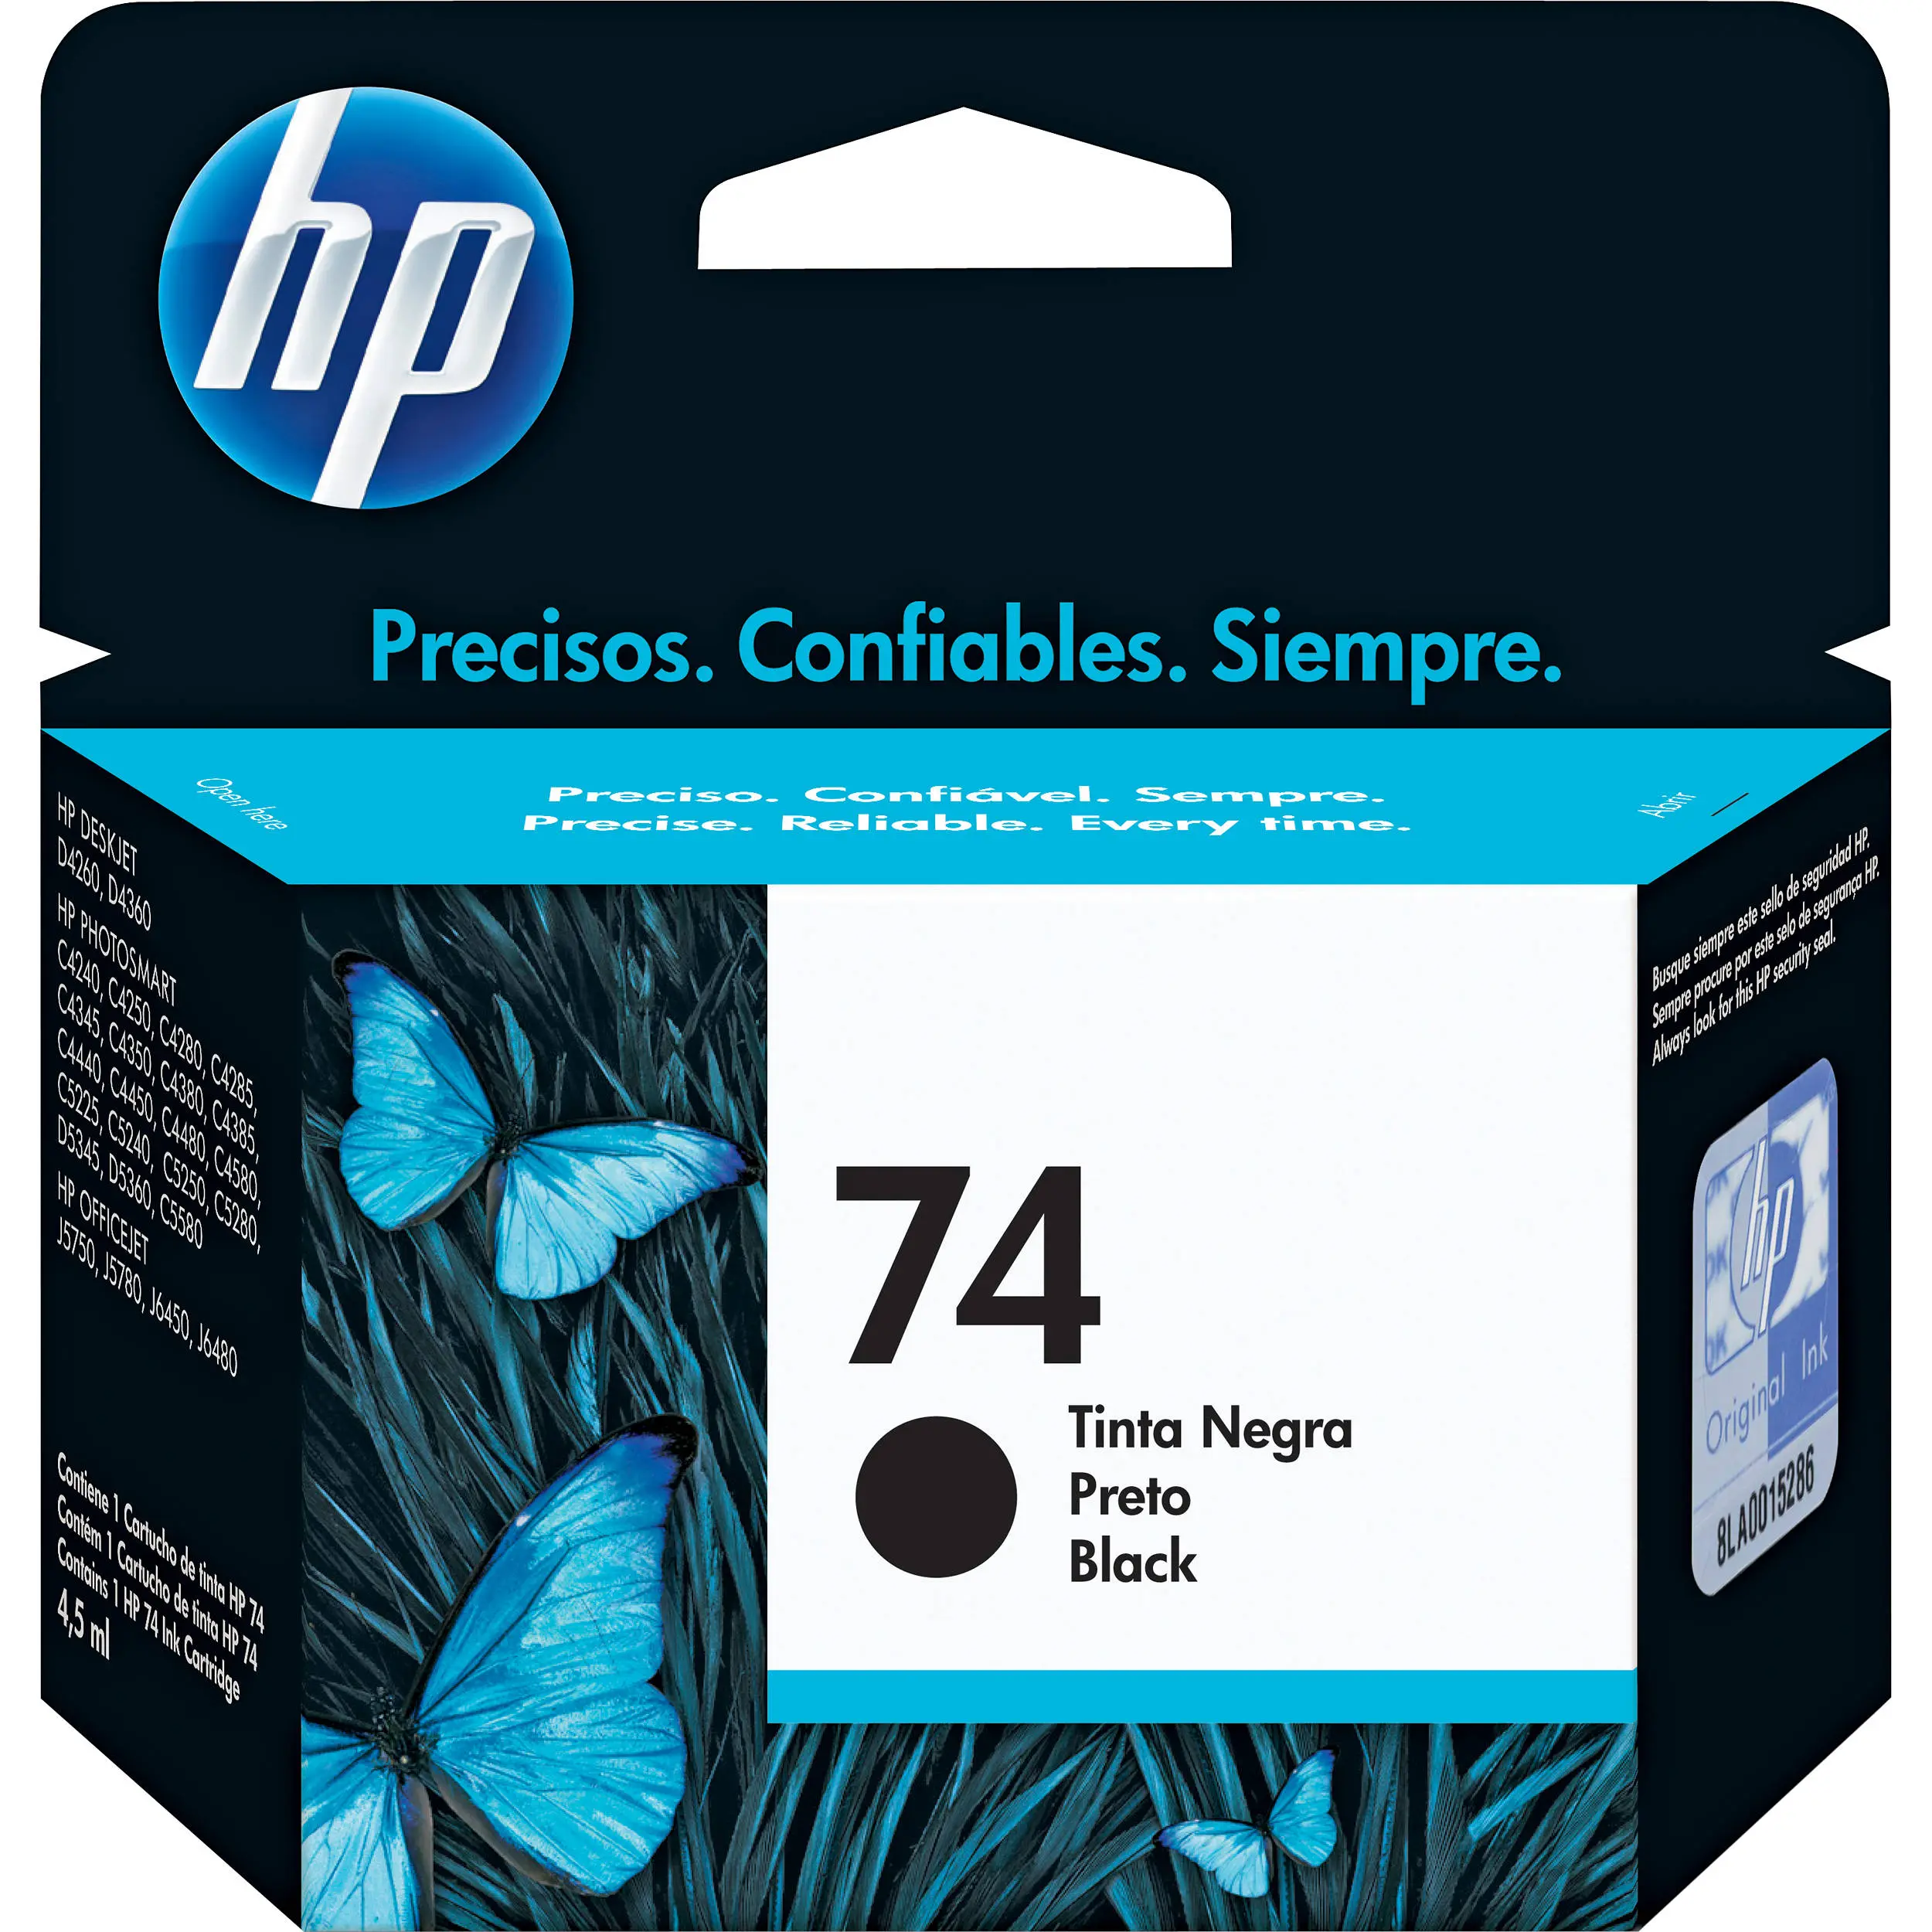 Where to find genuine hp 74 cartridges